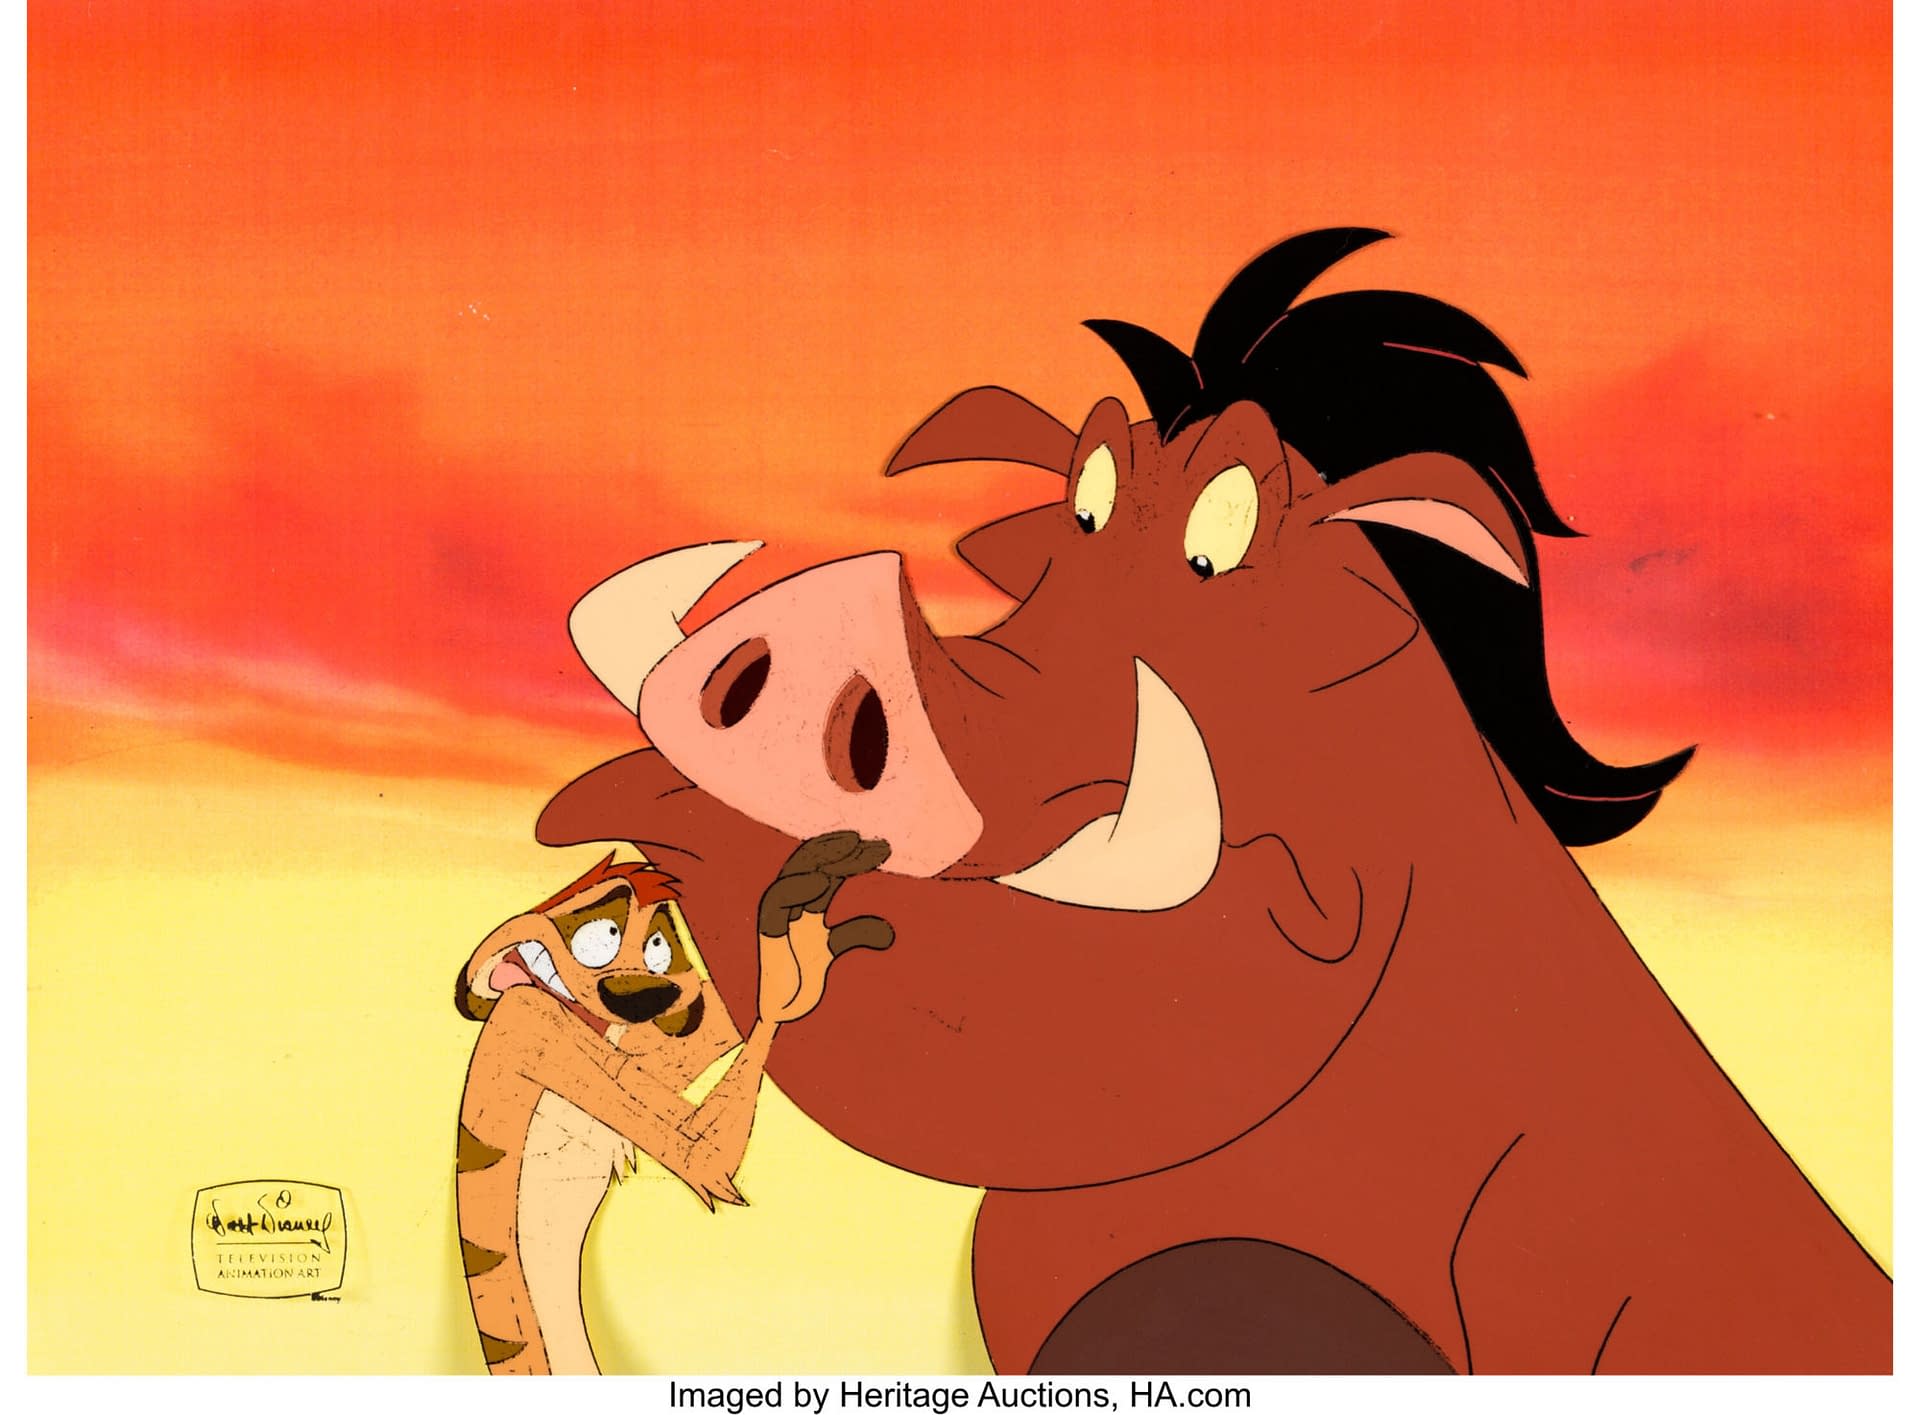 One Fan Will Win A The Lion King's Timon & Pumbaa Production Cel